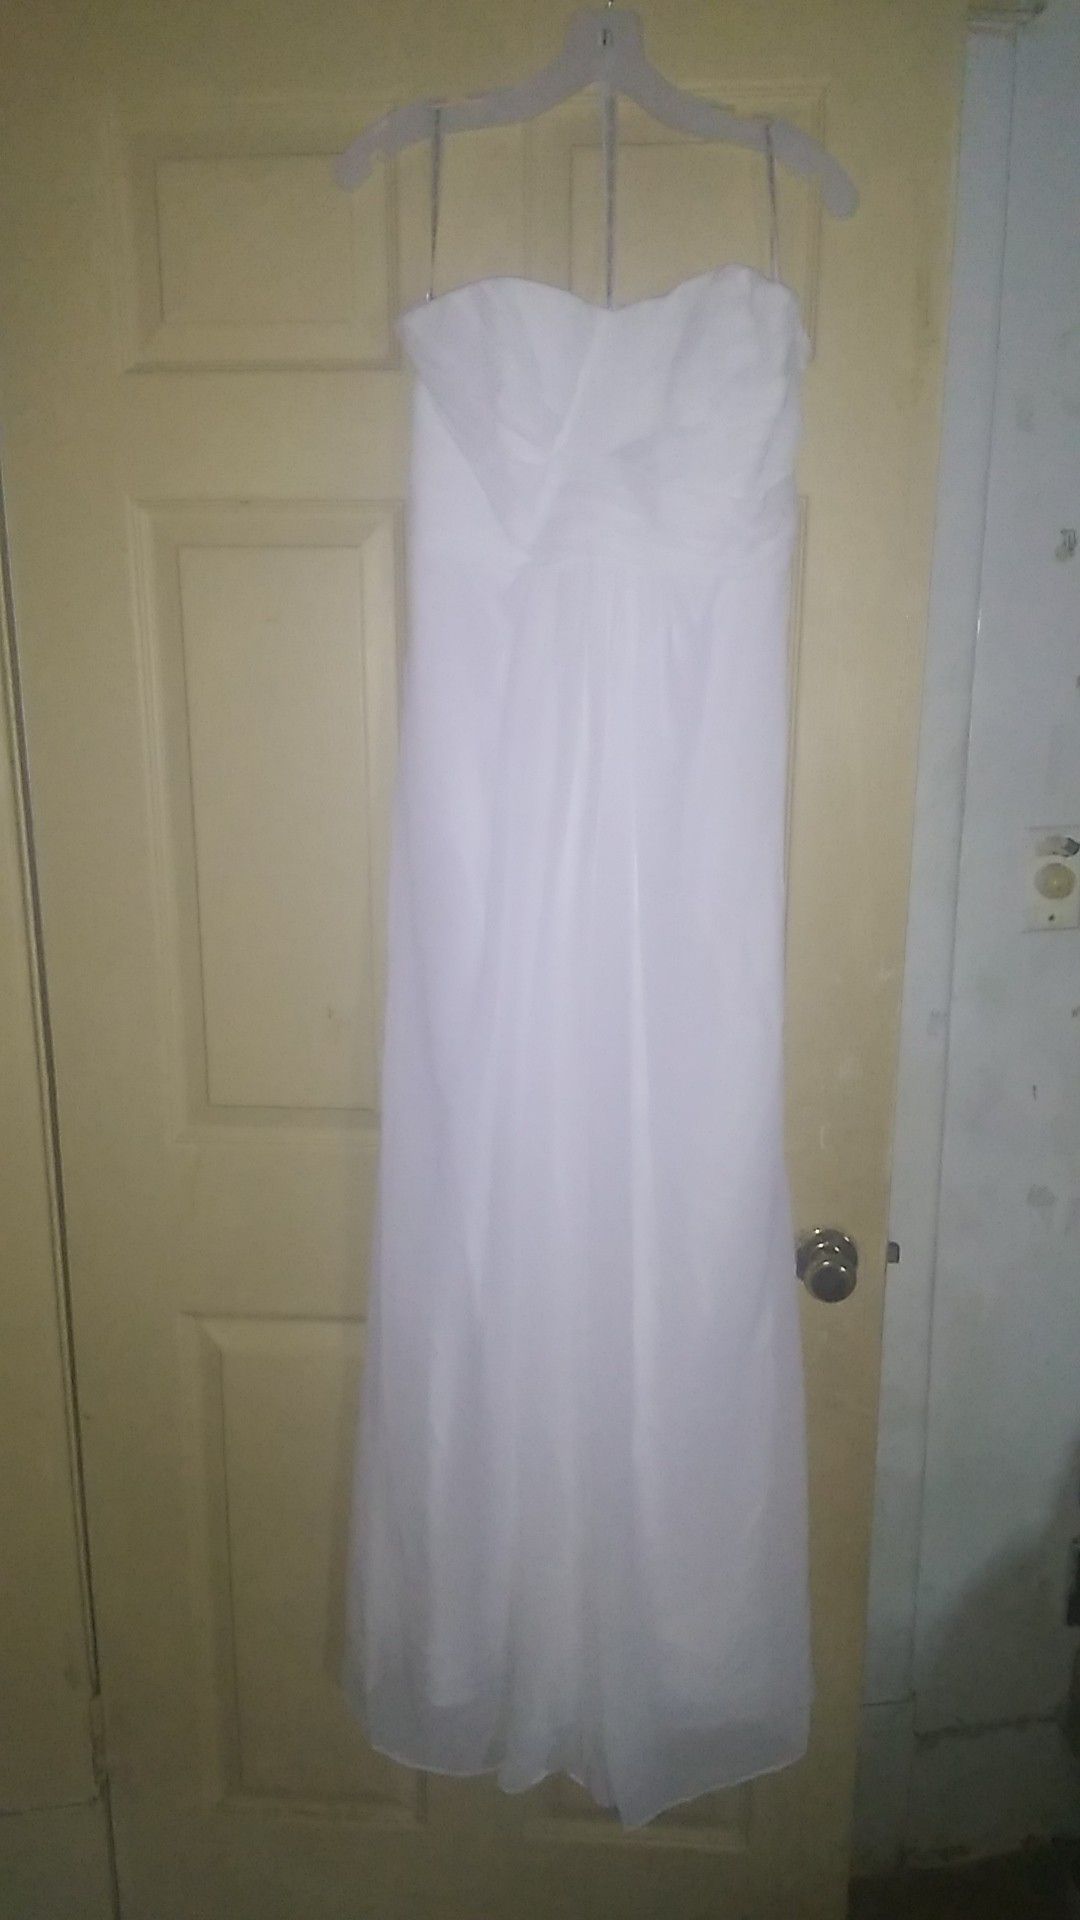 Brand new never wore David bridal Beach wedding dress. NEED THIS GONE TODAY ONLY